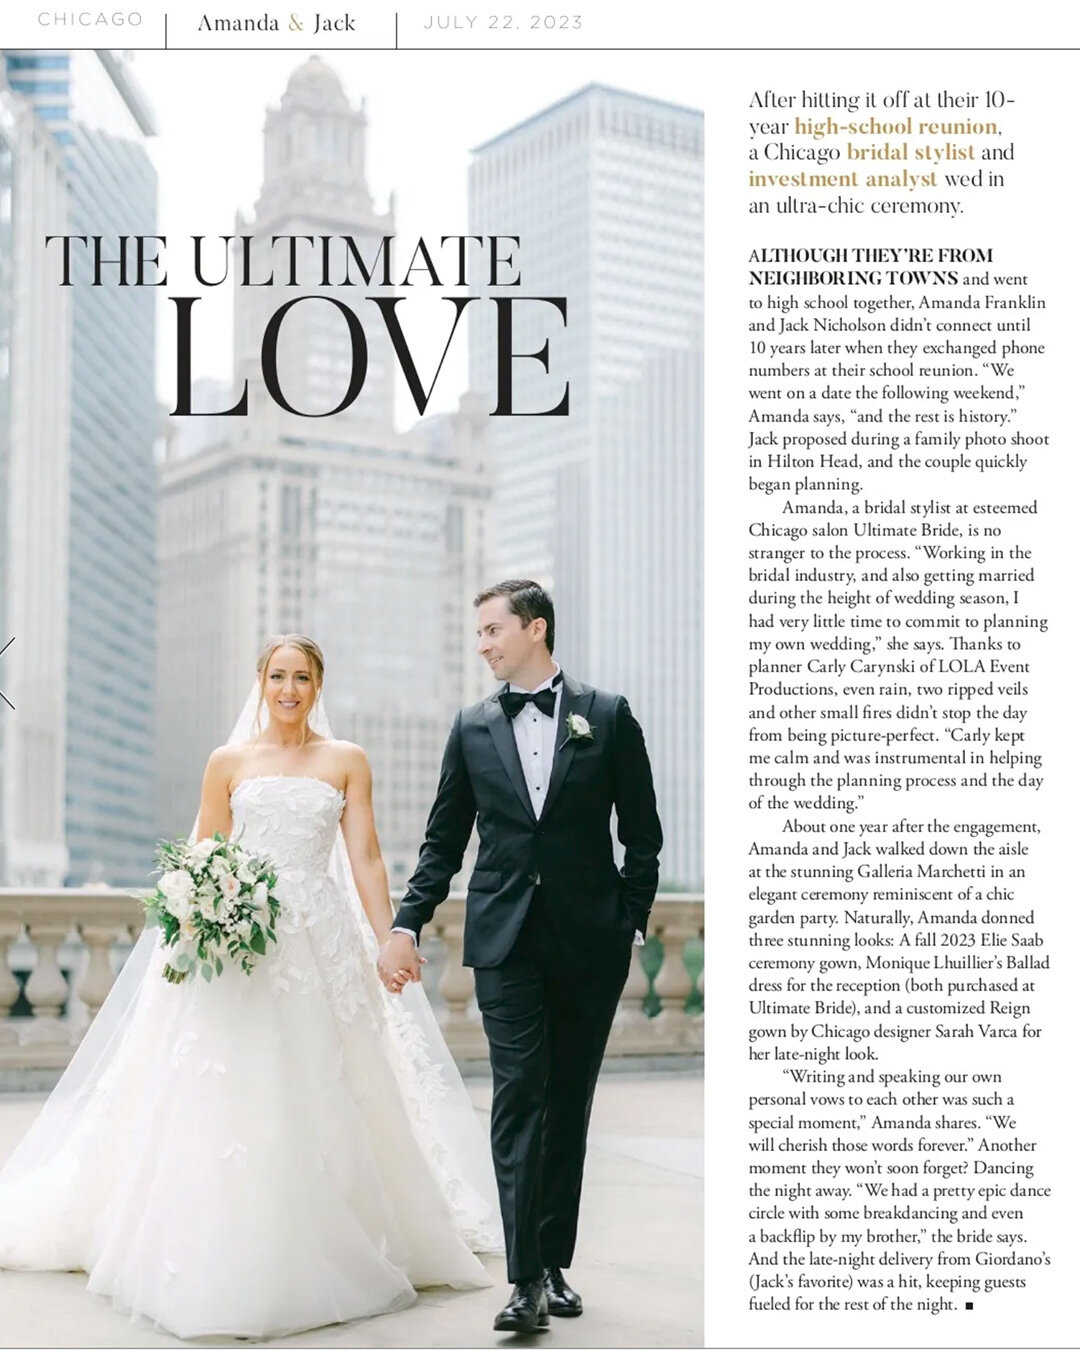 I'm beyond thrilled to see Amanda &amp; Jack's wedding in the latest @modluxweddingschi edition. There is still so much I need to share from this amazing day! 

@lolaeventpros 
@lolacarlyc 
@wildlightfilms
@galleriamarchetti
@bsansostiartistry
@ultim